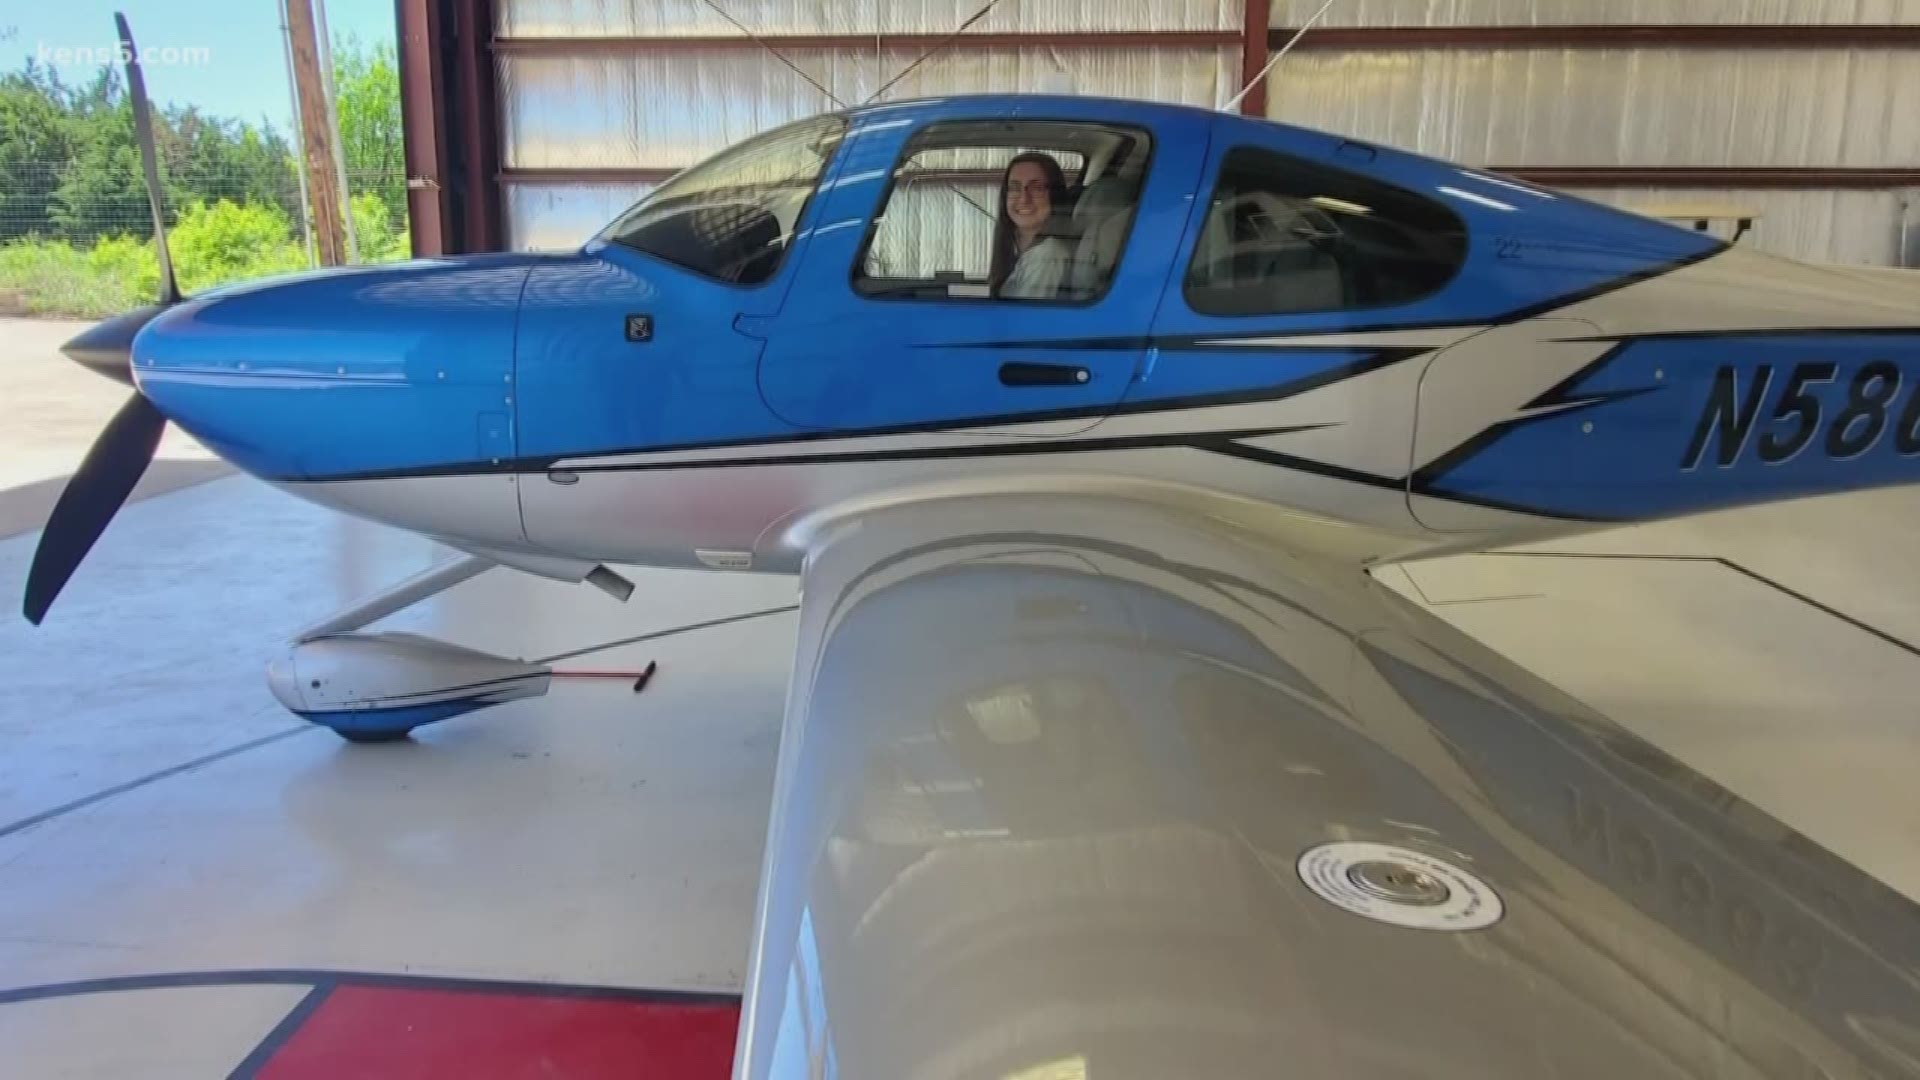 The Air Force and the aerospace industry are hoping to address a national pilot shortage by inspiring high school students - including one high schooler in San Antonio - to pursue their aviation careers.